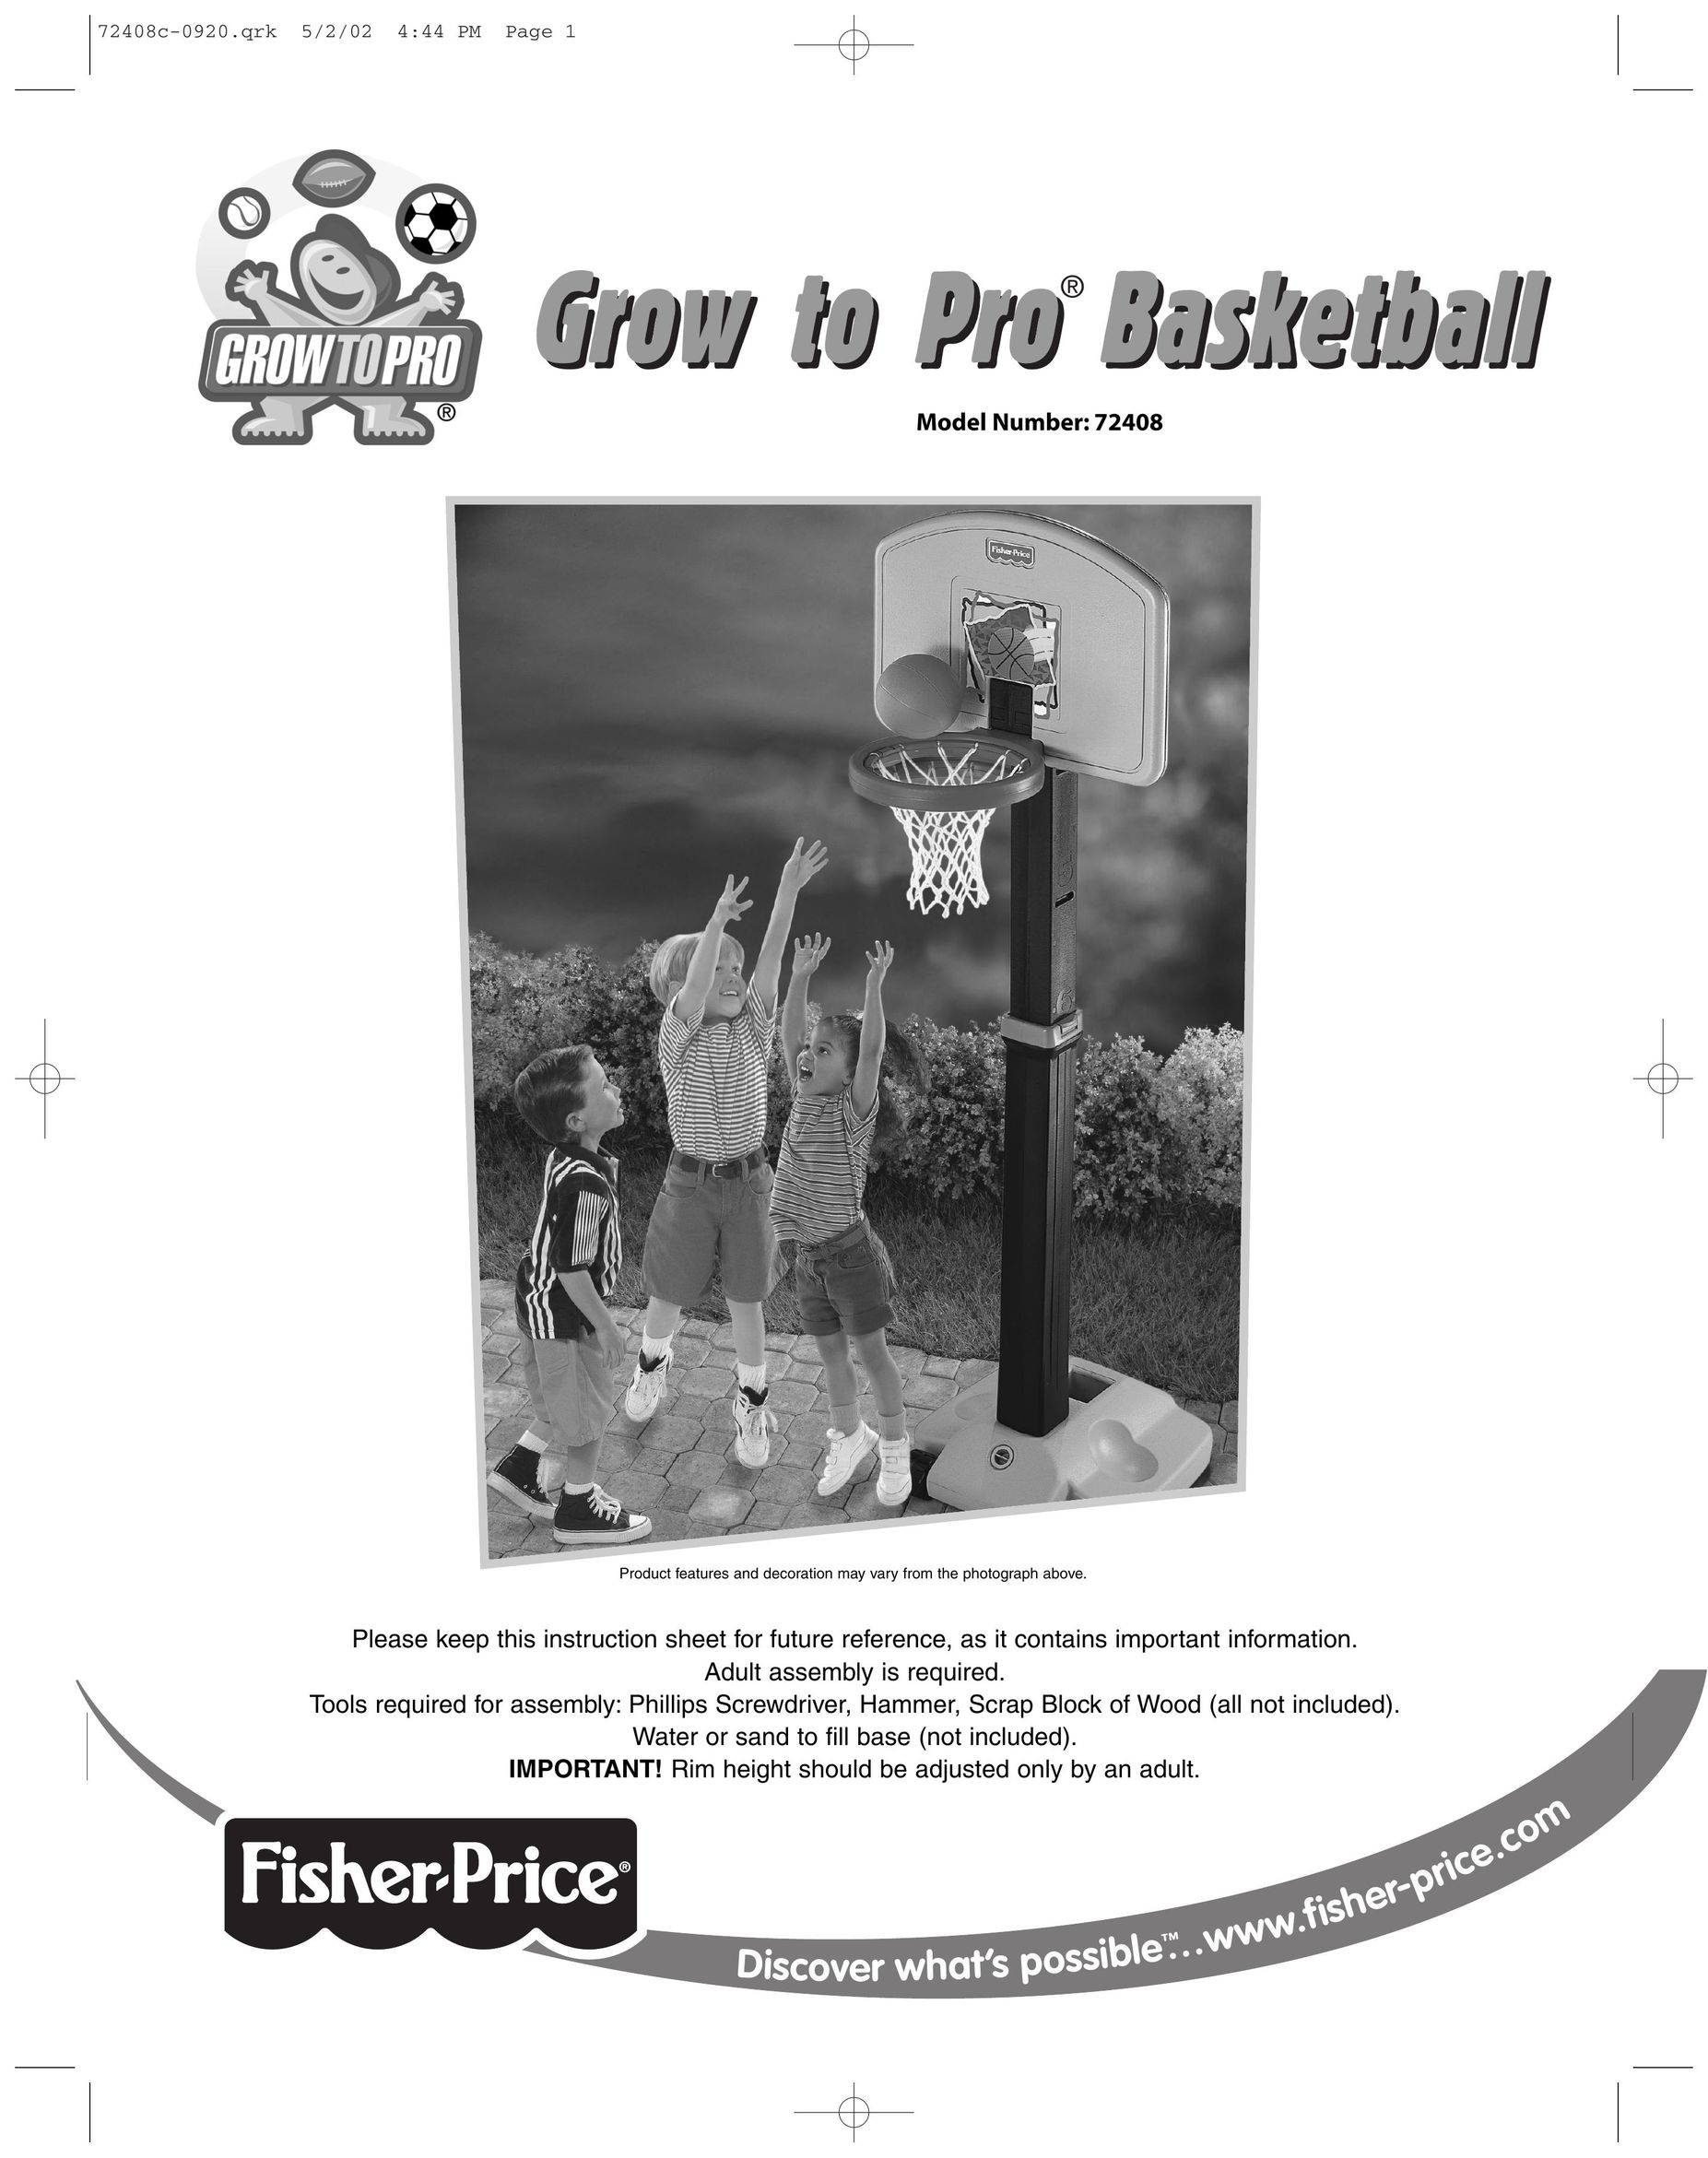 Fisher-Price 72408 Fitness Equipment User Manual (Page 1)